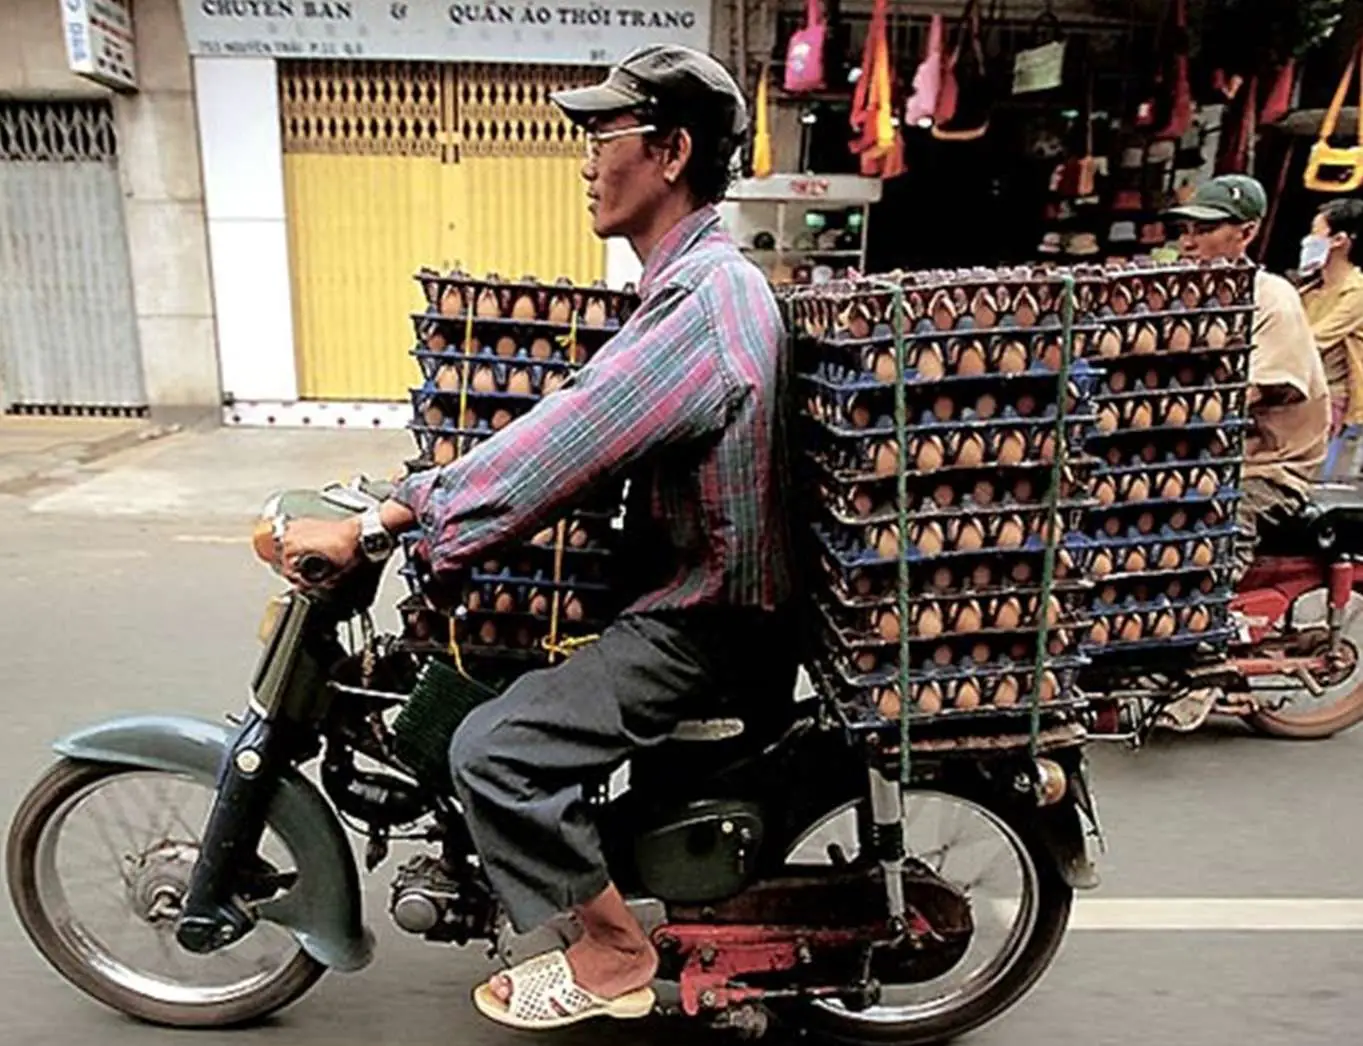 Transporting Eggs On Motor Scooter